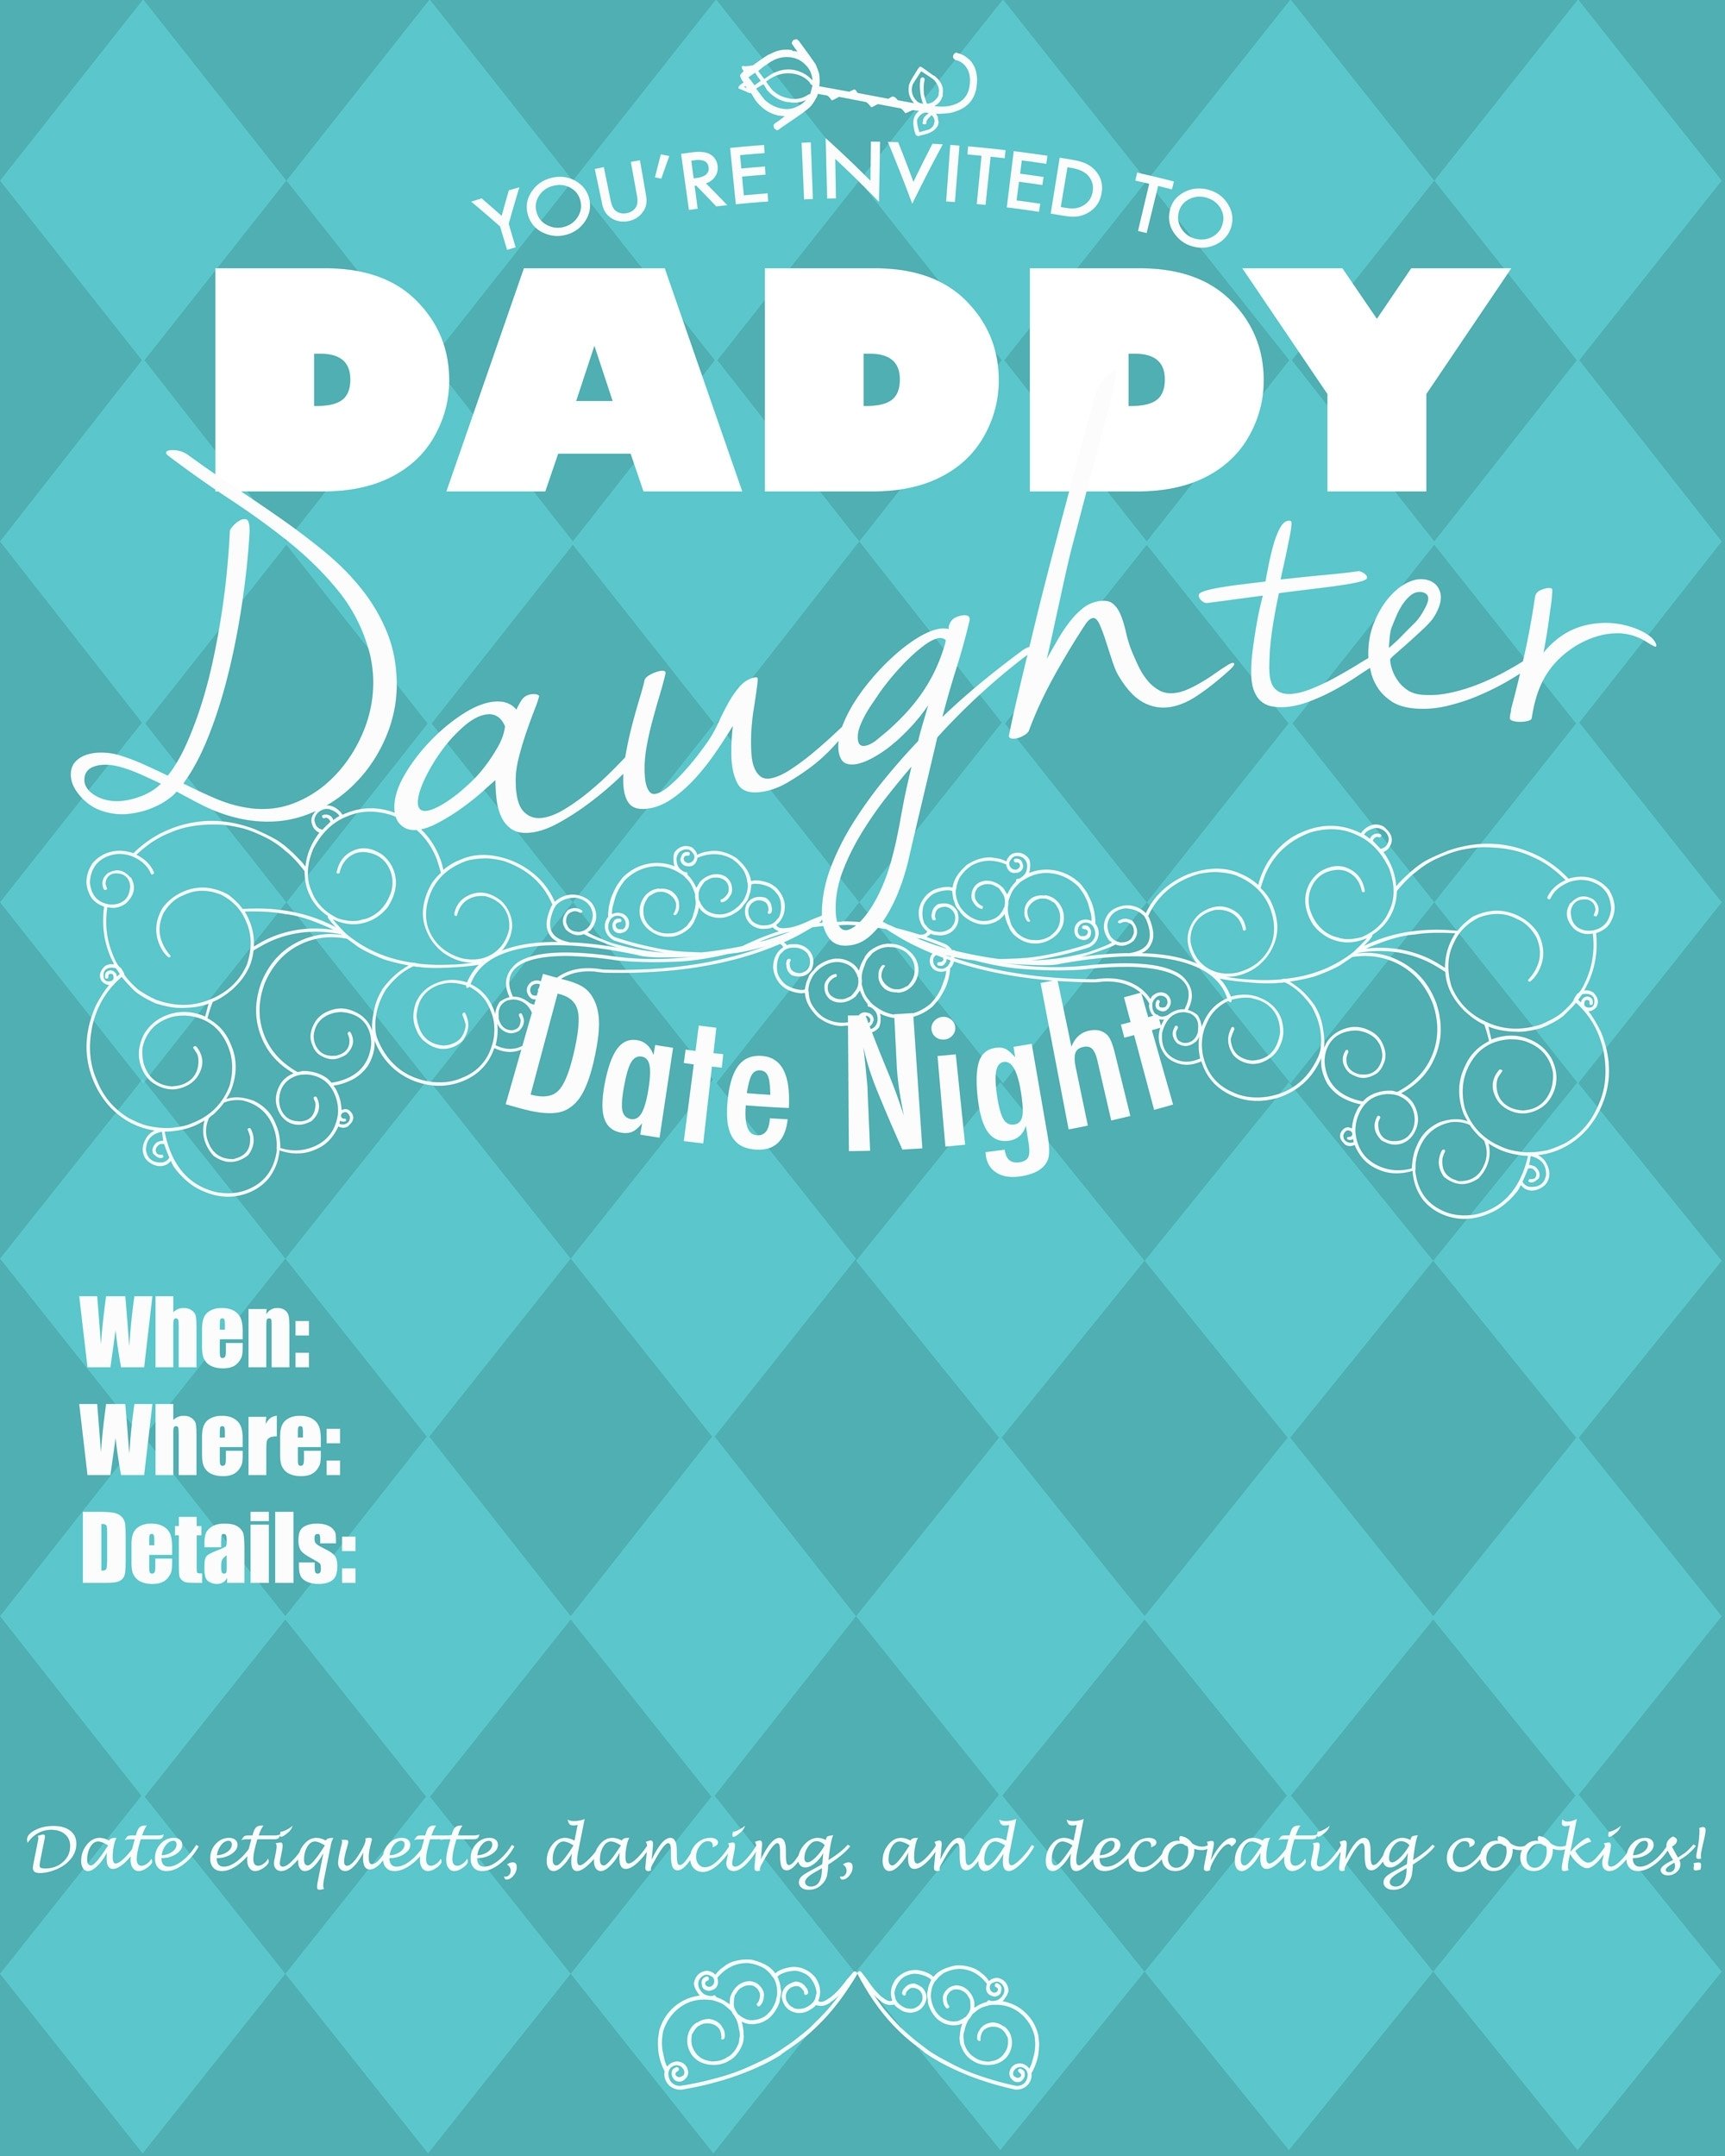 10 Beautiful Daddy Daughter Date Night Ideas blank invitation for daddy daughter date night family fun lds 2023